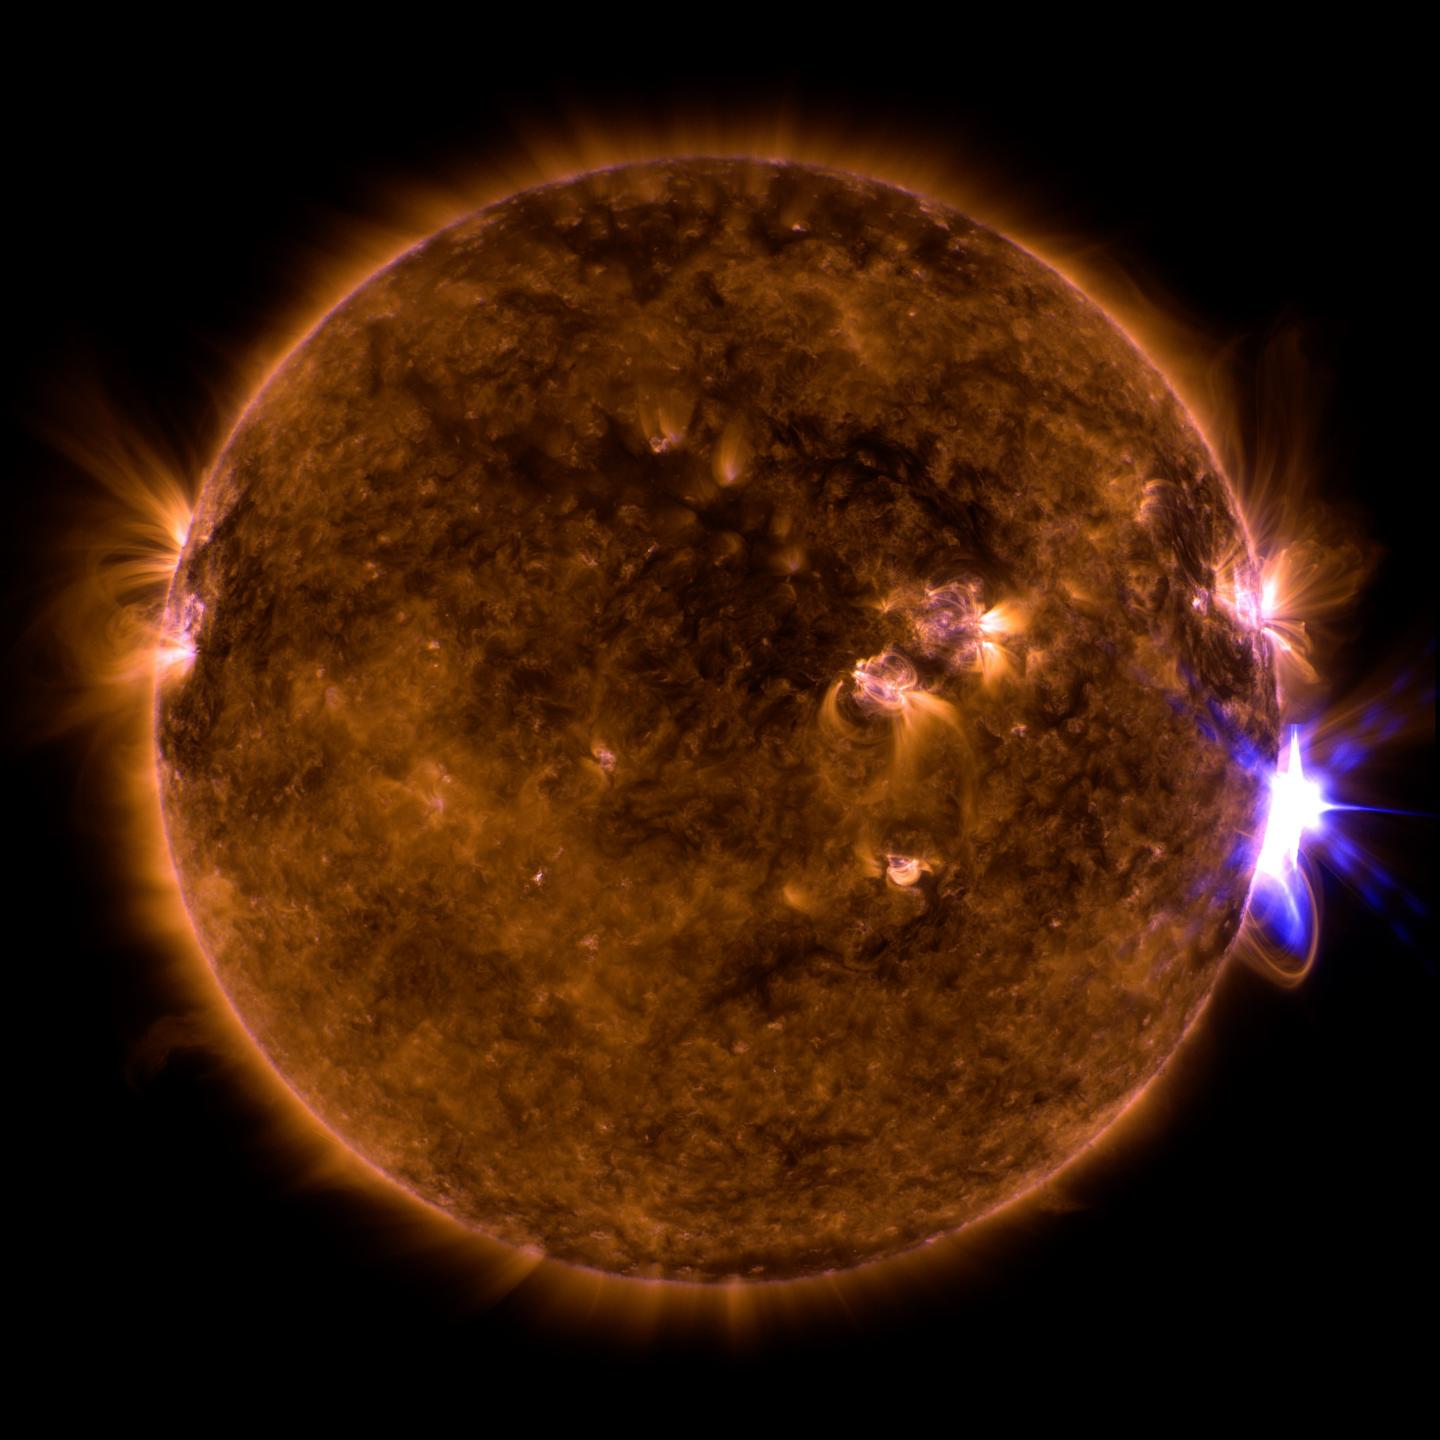 SDO View of Sept. 10, 2017, Flare (1 of 2)